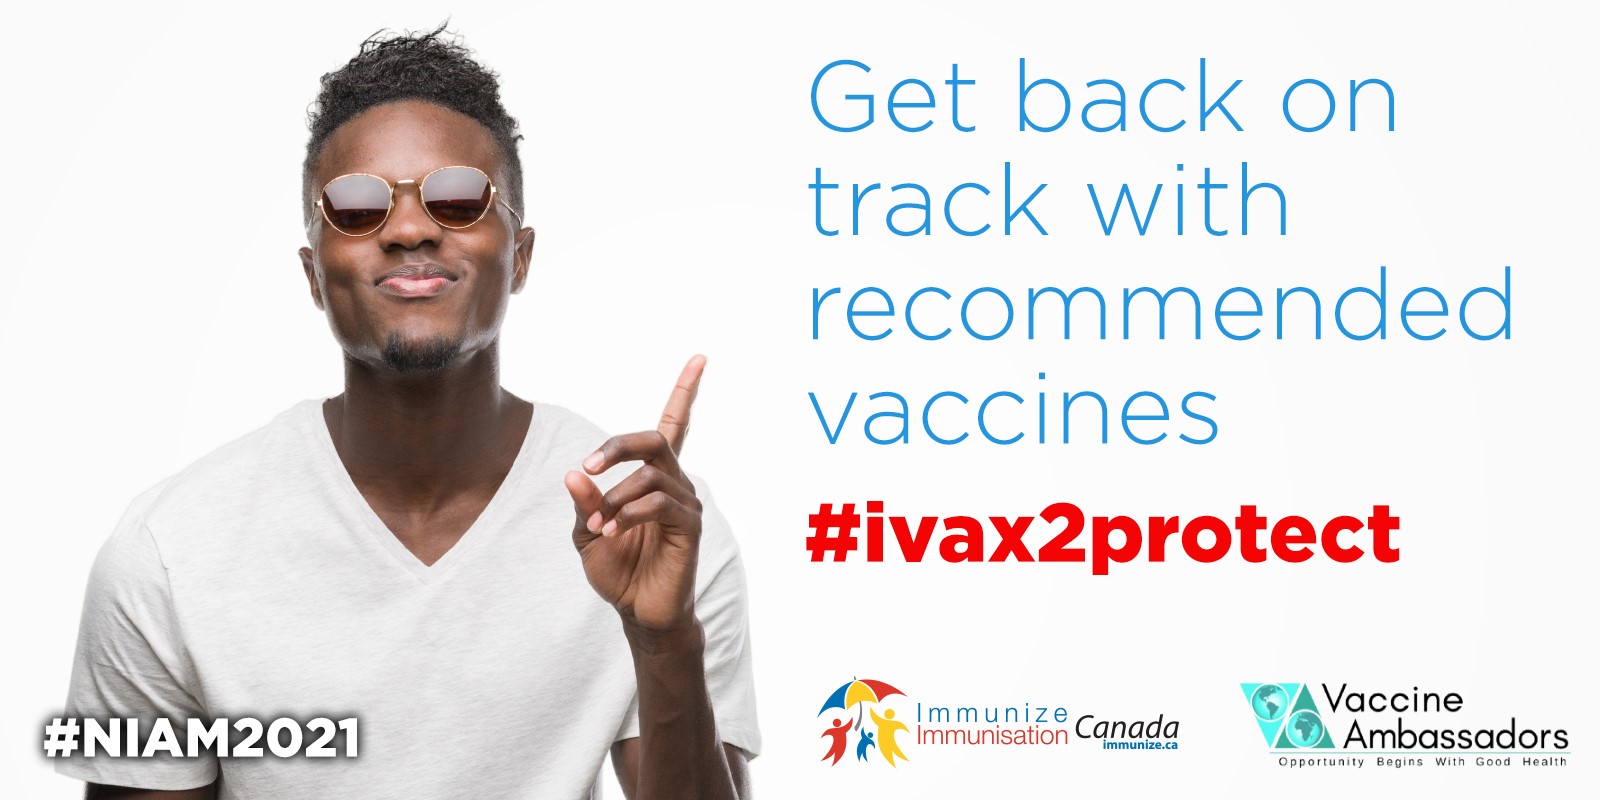 Adults: Get back on track with recommended vaccines